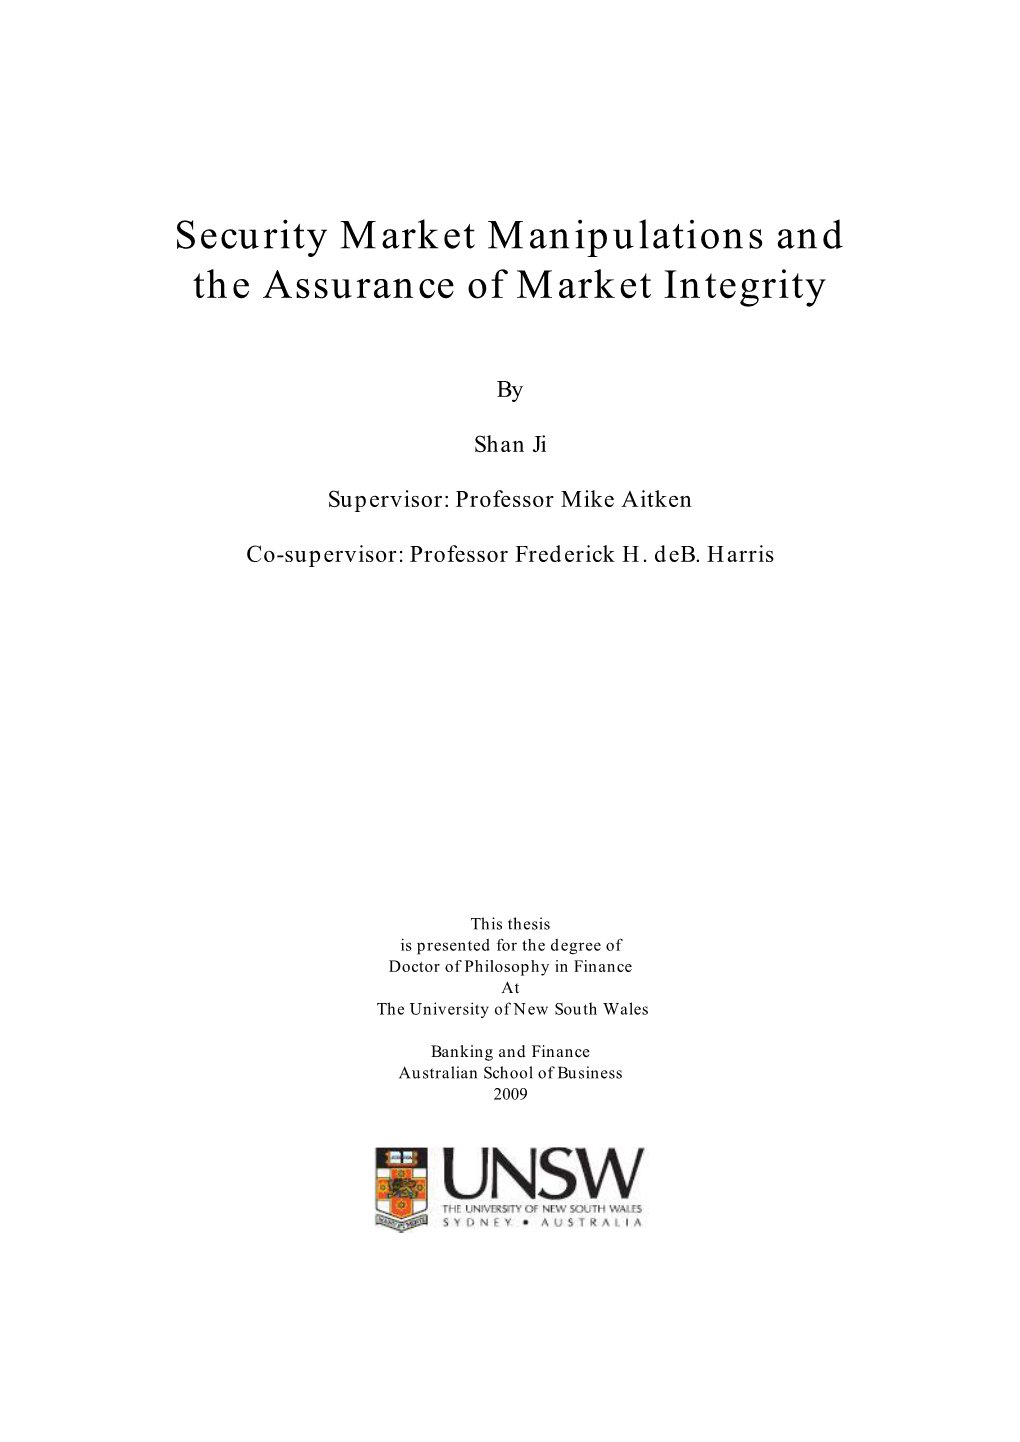 Security Market Manipulations and the Assurance of Market Integrity